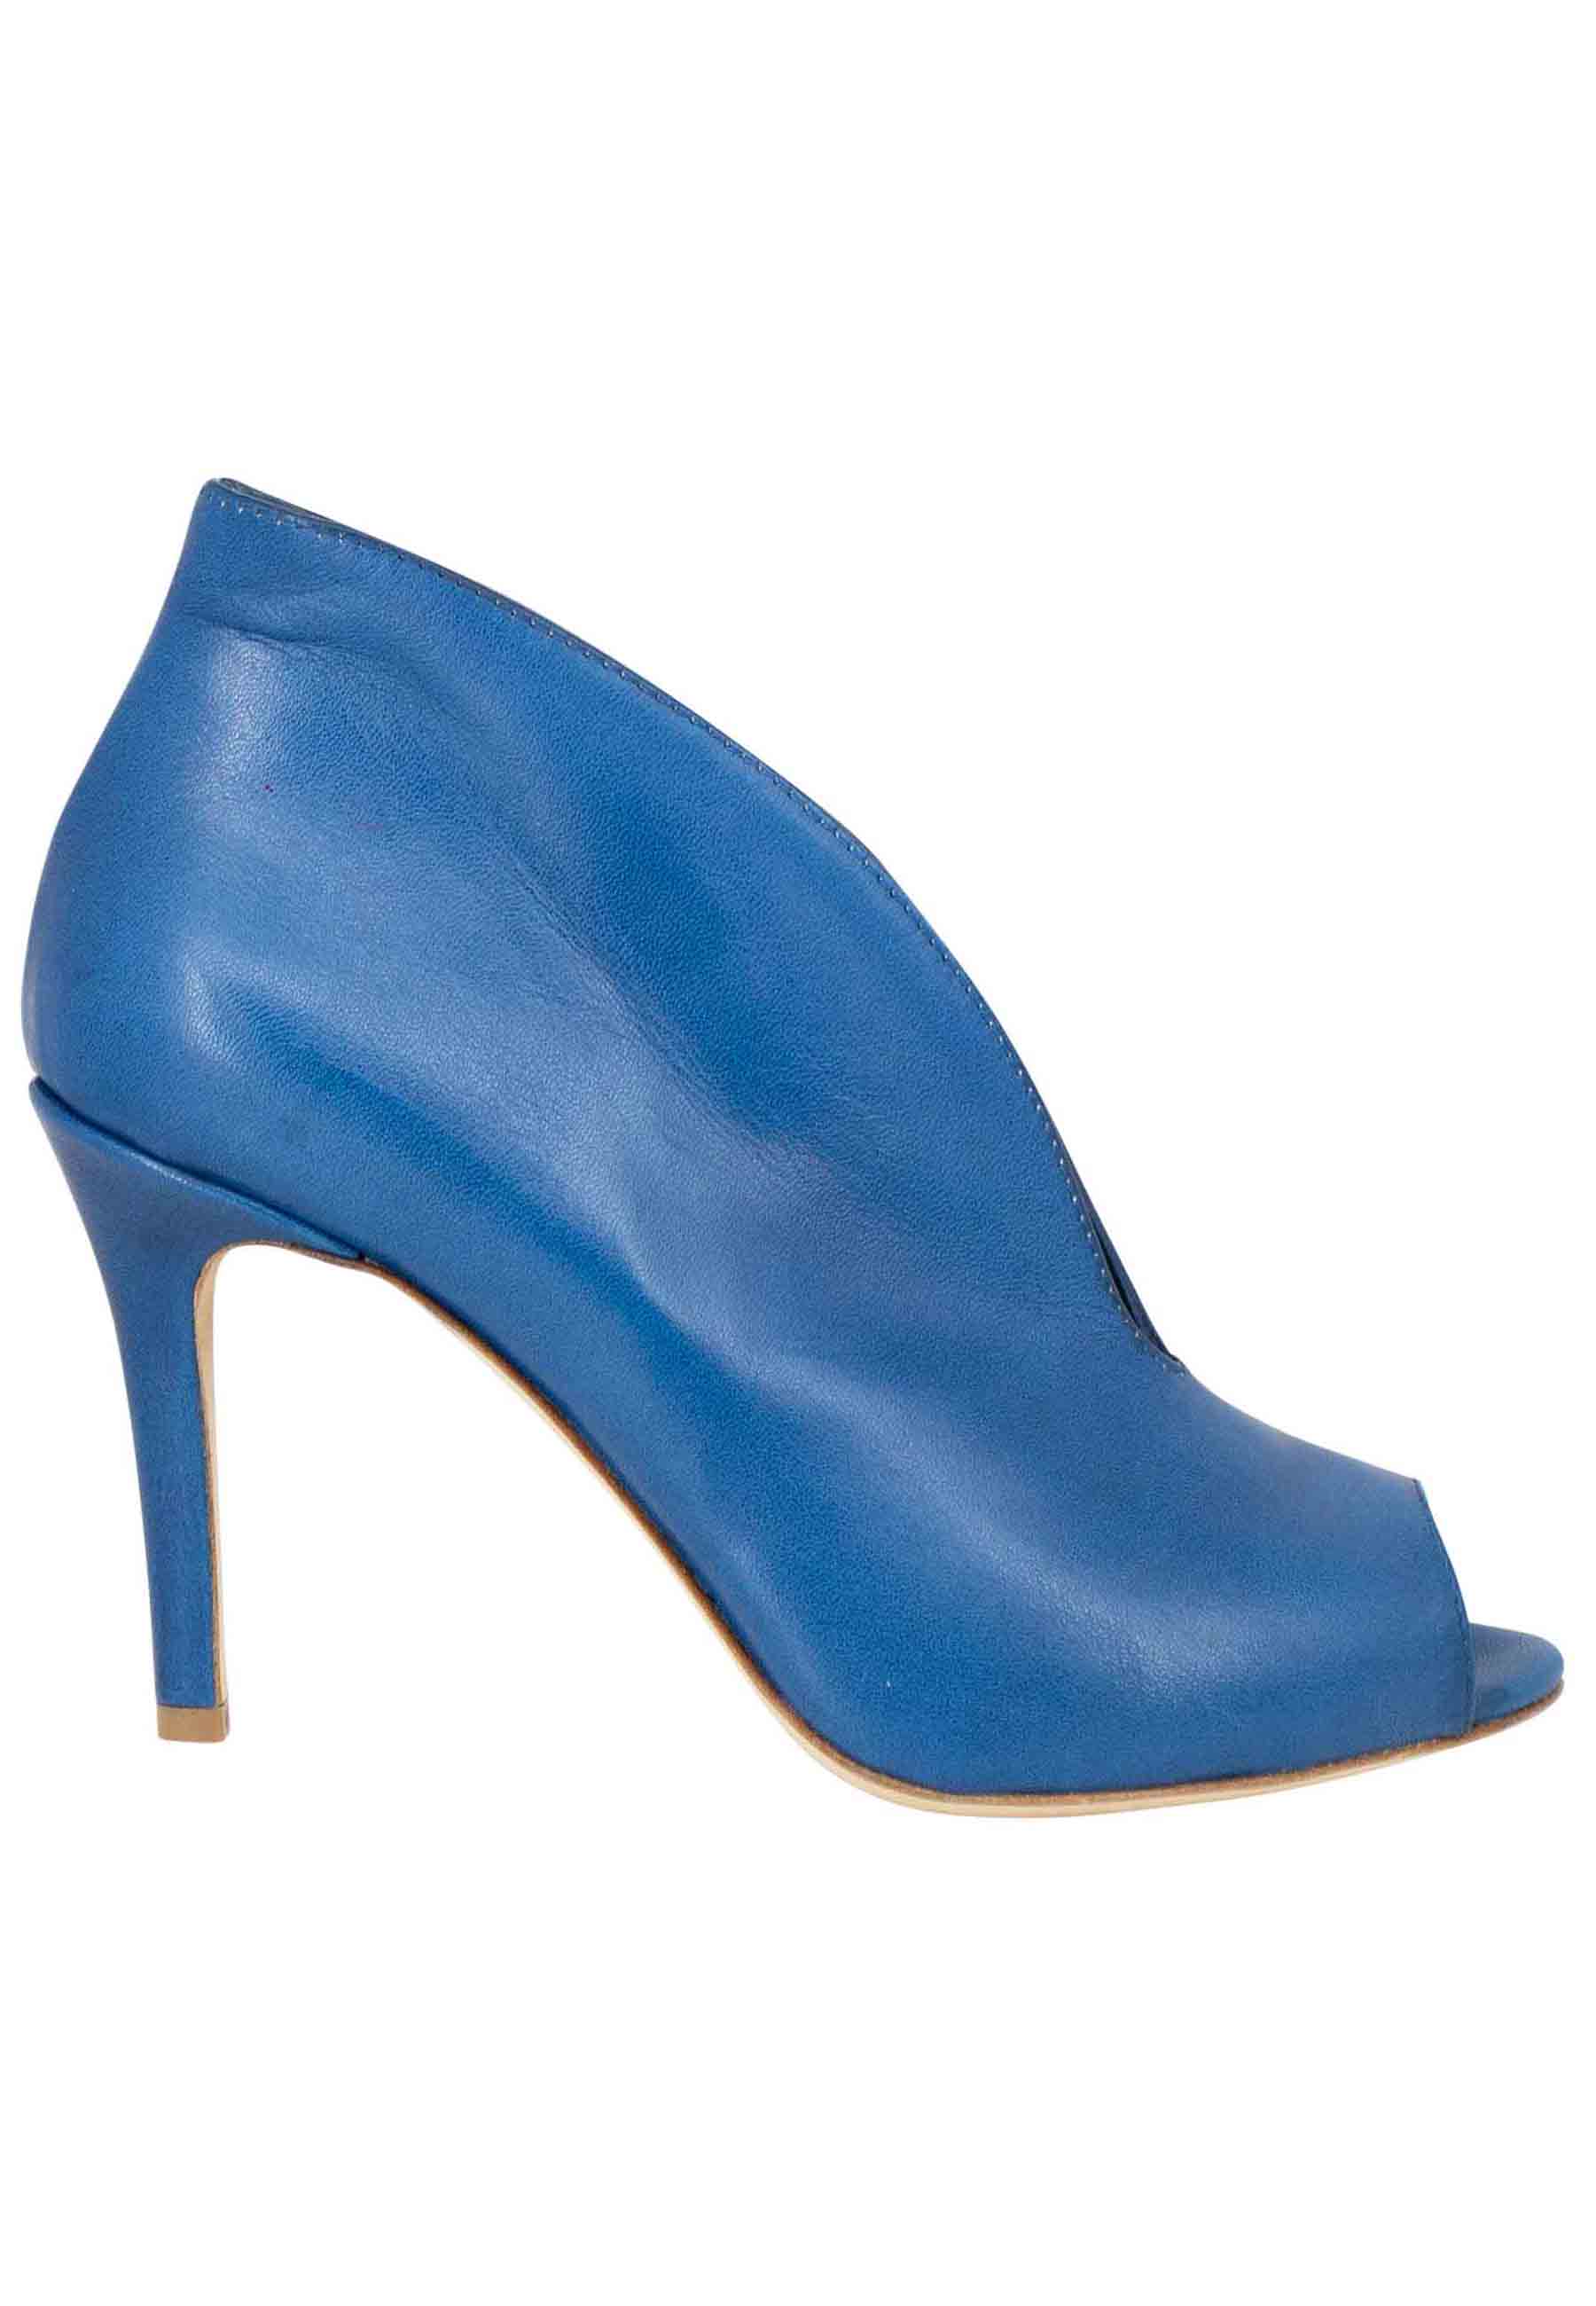 Women's open toe ankle boots in denim blue leather with high heel